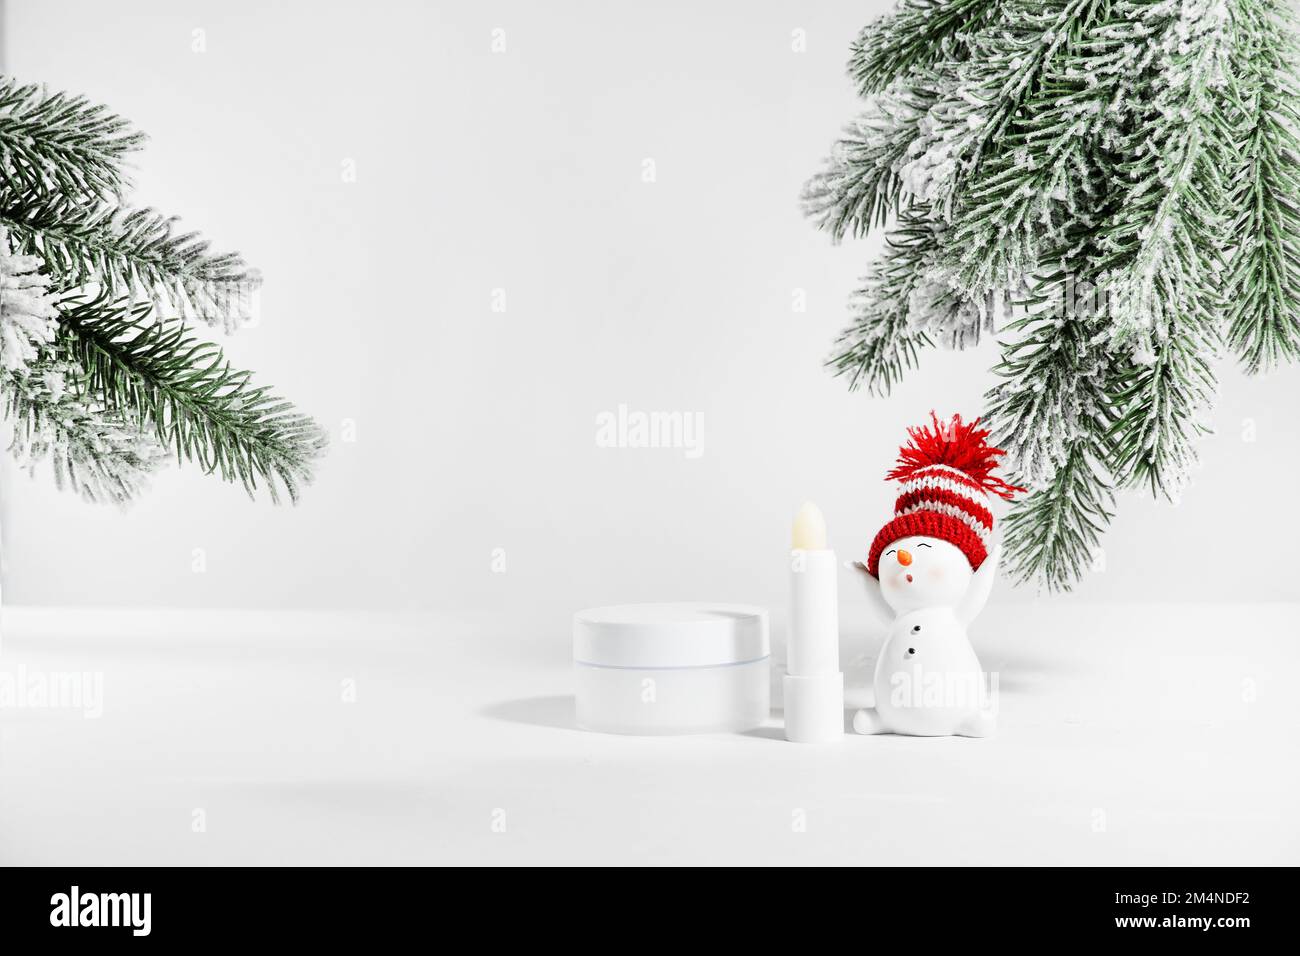 White jar of skin care cosmetics on a white surface with a snowman. Winter cosmetics. Empty container with fir branches background. Christmas gift ide Stock Photo